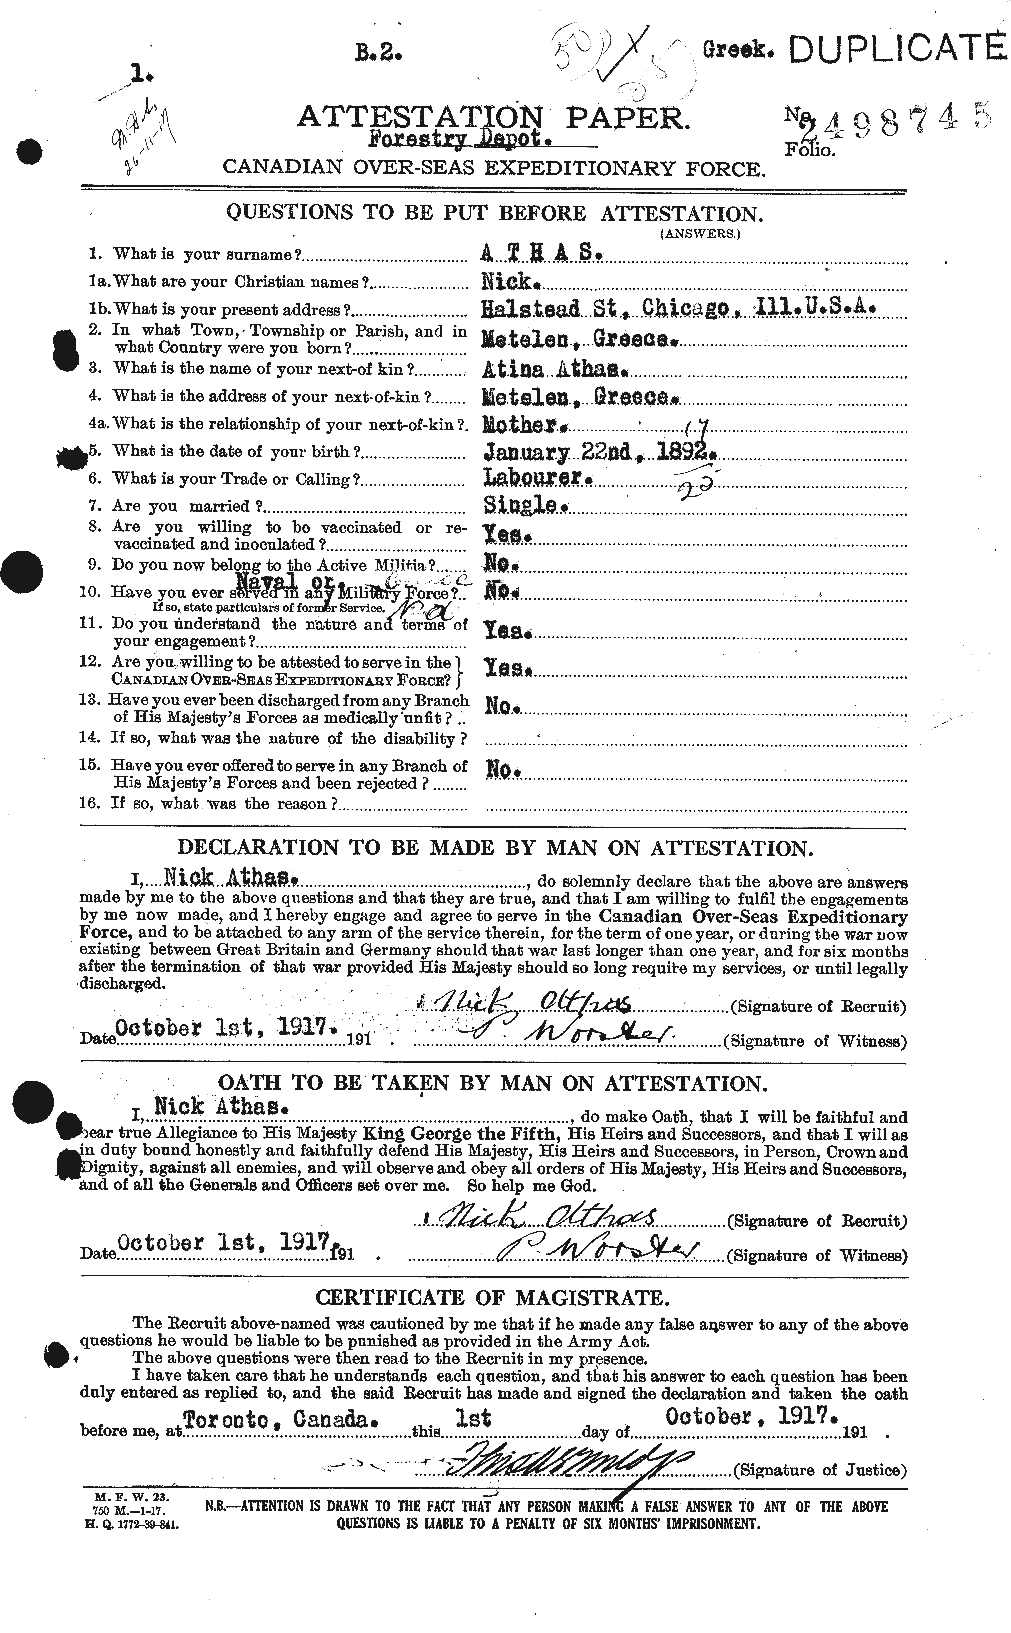 Personnel Records of the First World War - CEF 216993a